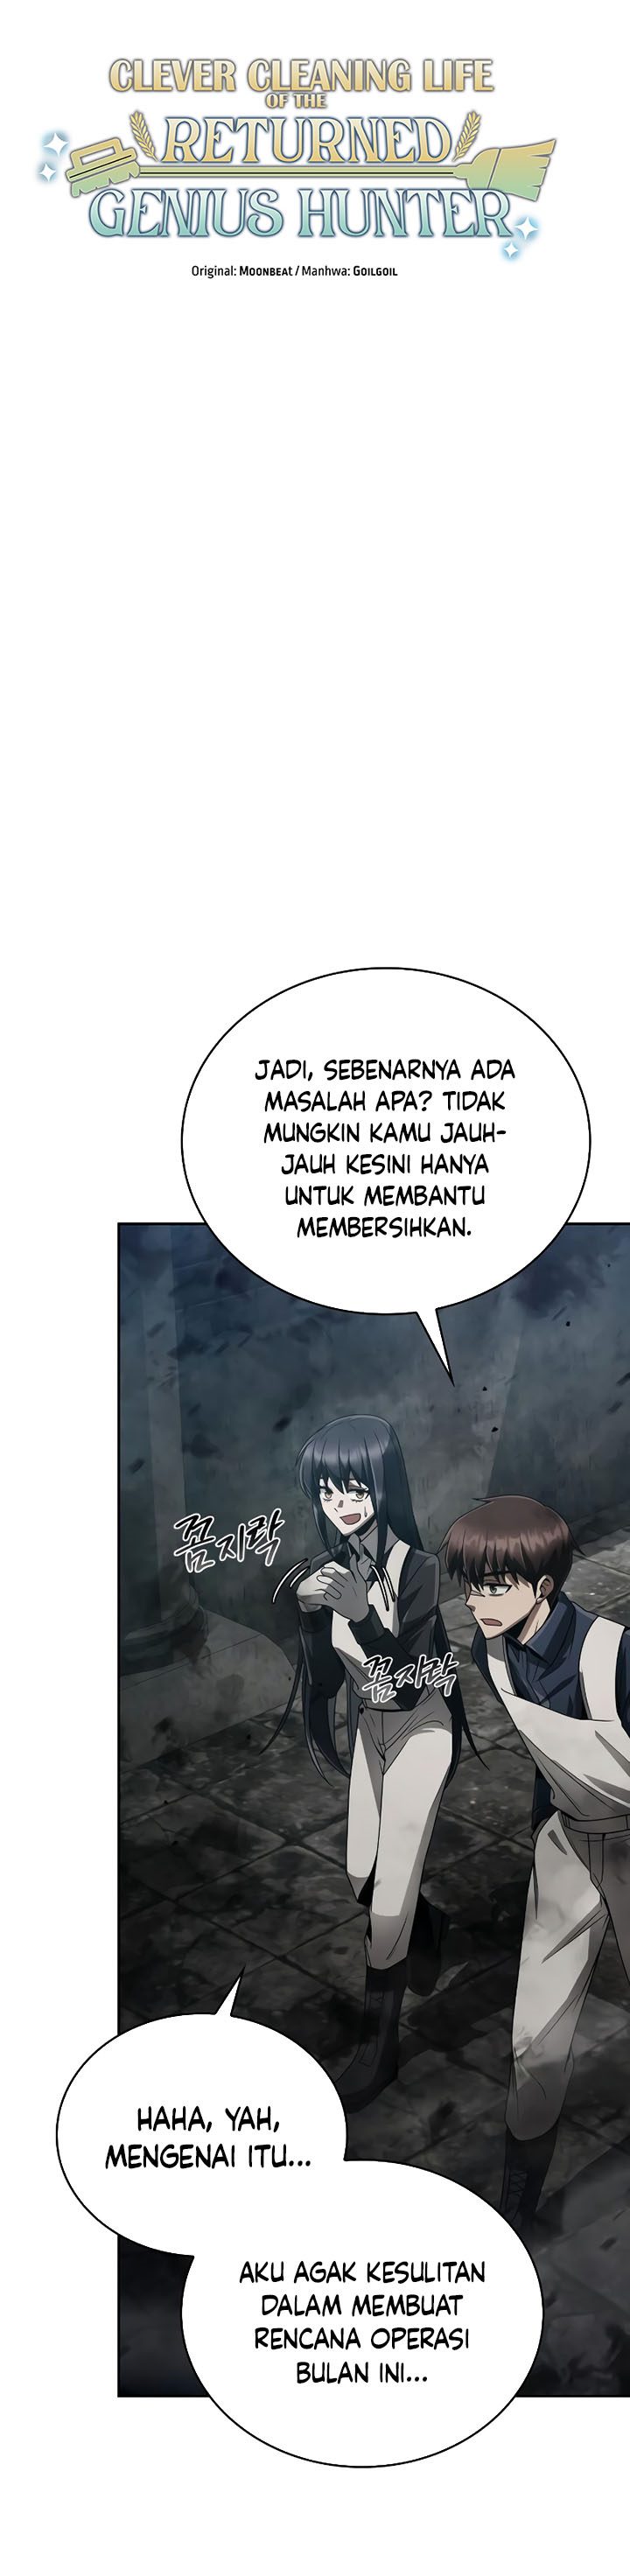 Dilarang COPAS - situs resmi www.mangacanblog.com - Komik clever cleaning life of the returned genius hunter 019 - chapter 19 20 Indonesia clever cleaning life of the returned genius hunter 019 - chapter 19 Terbaru 7|Baca Manga Komik Indonesia|Mangacan